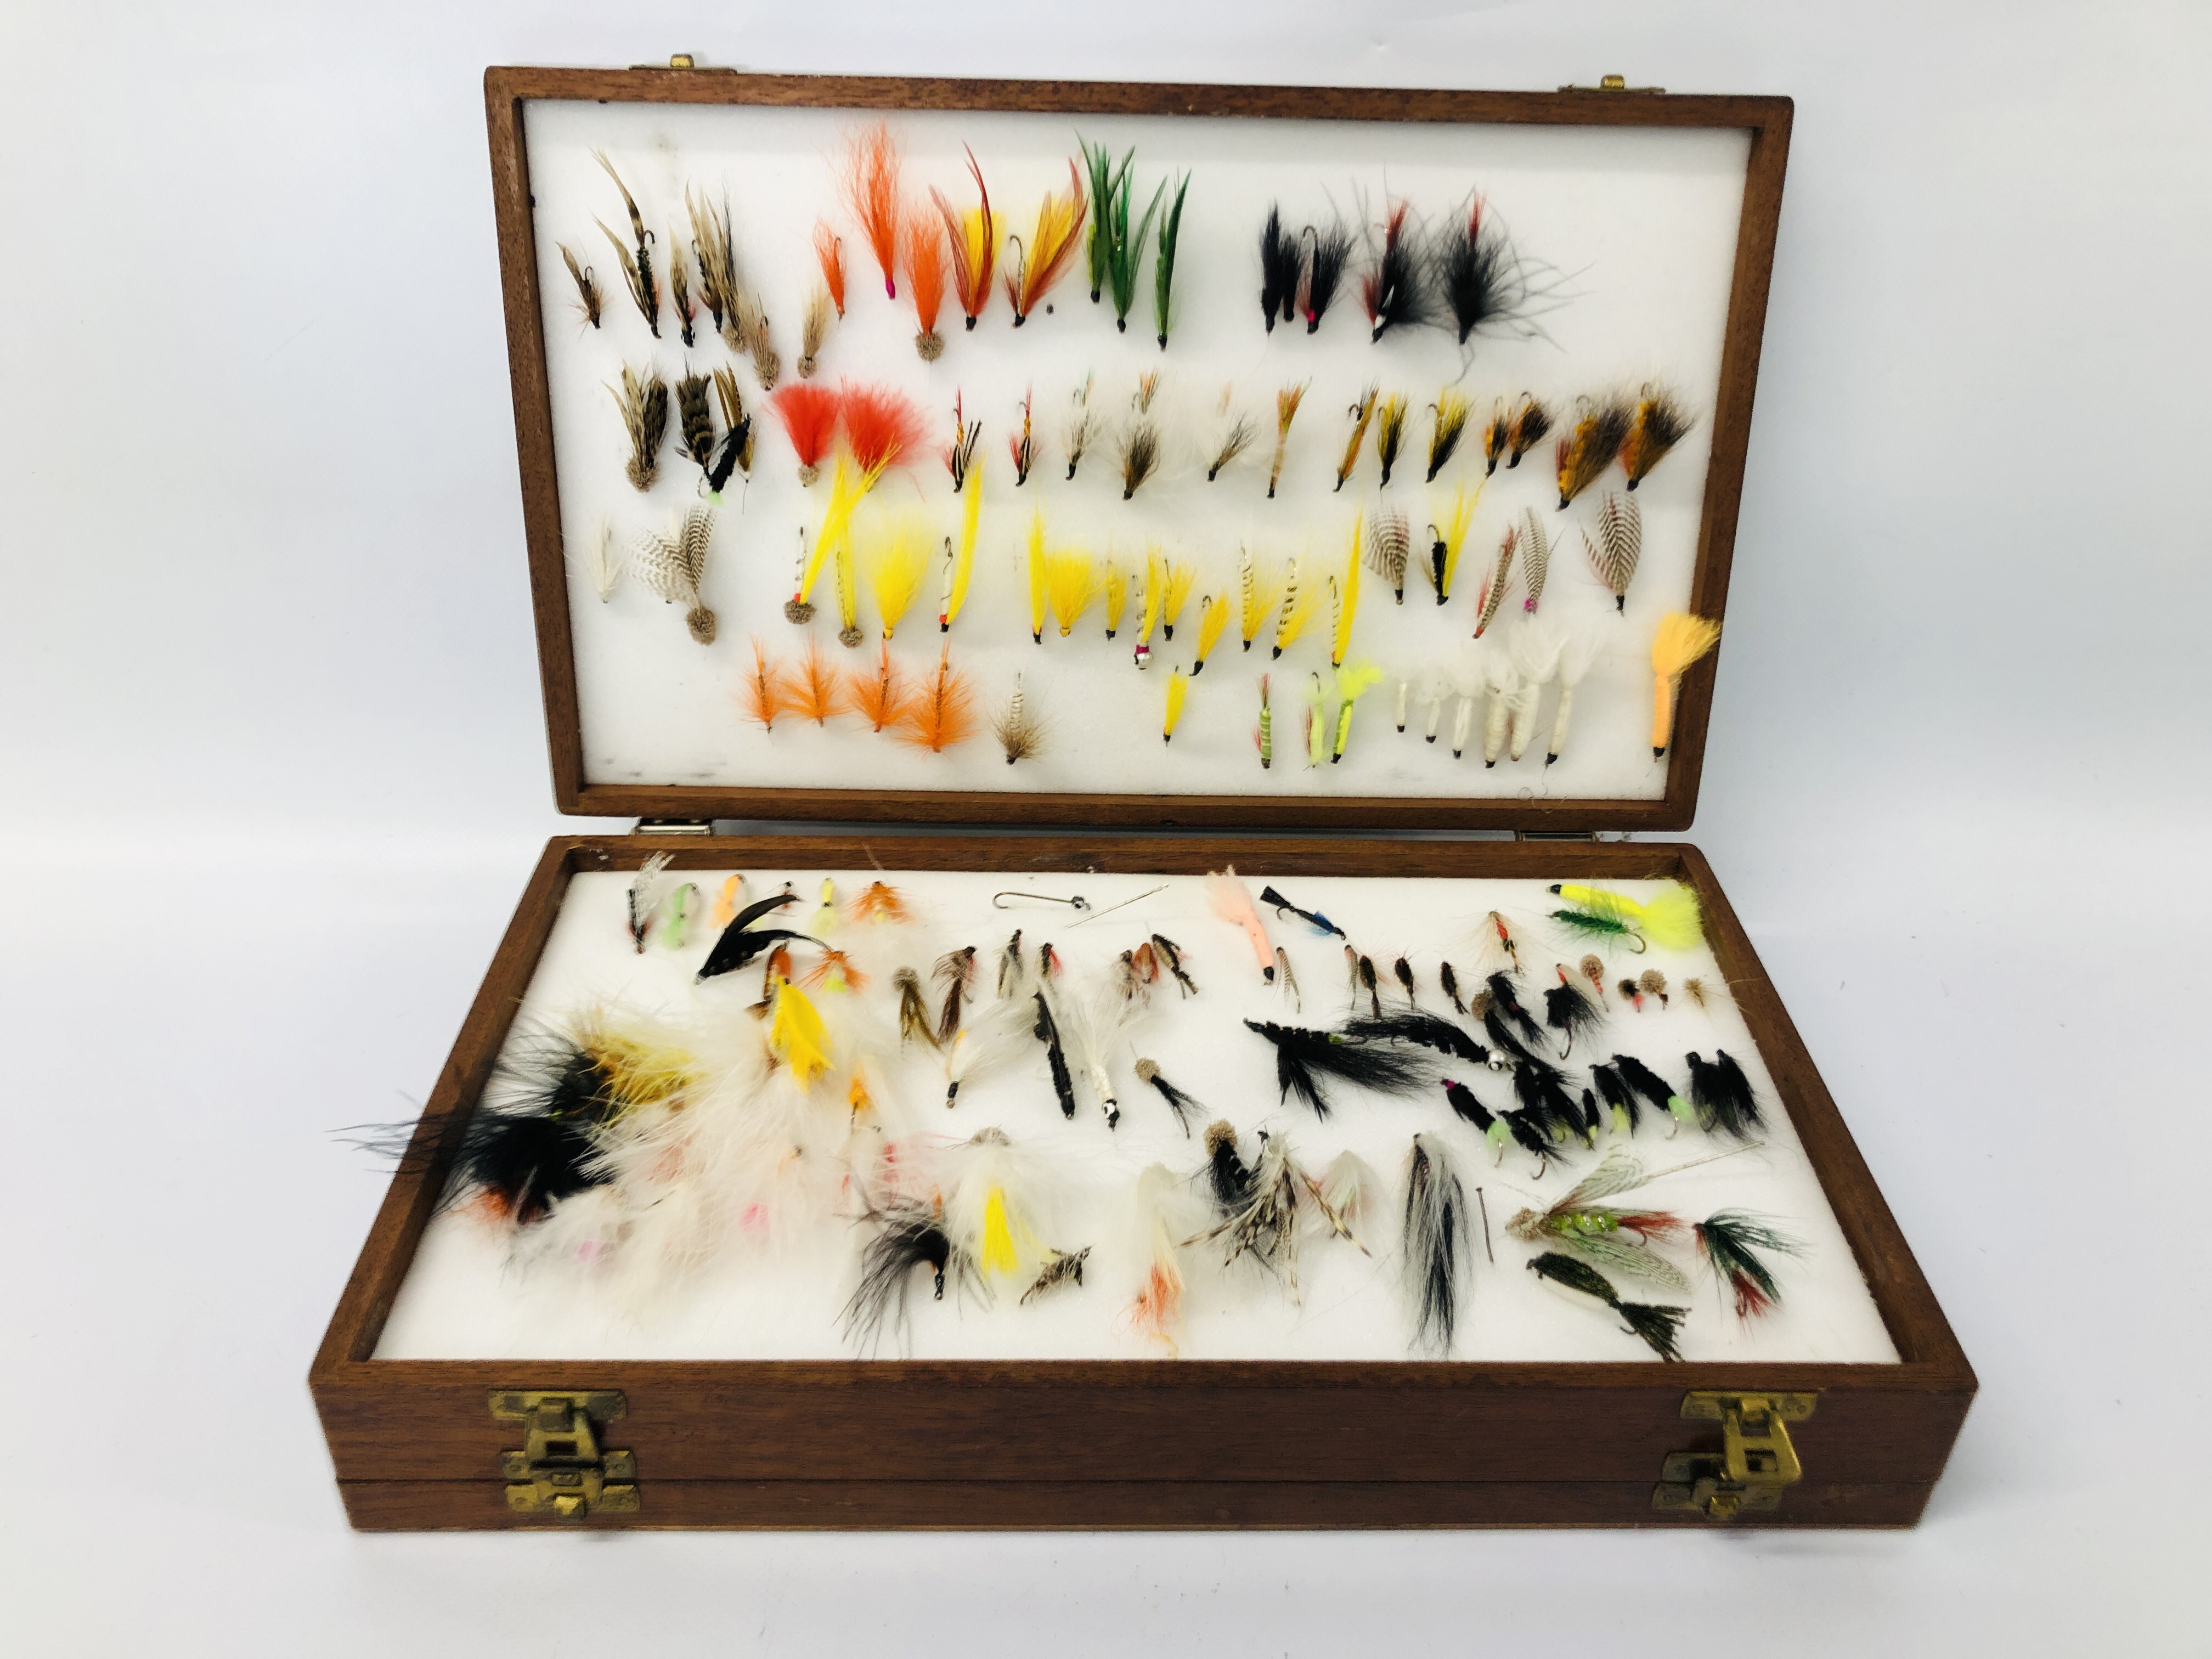 WOODEN CASE CONTAINING A LARGE QUANTITY OF FISHING FLIES